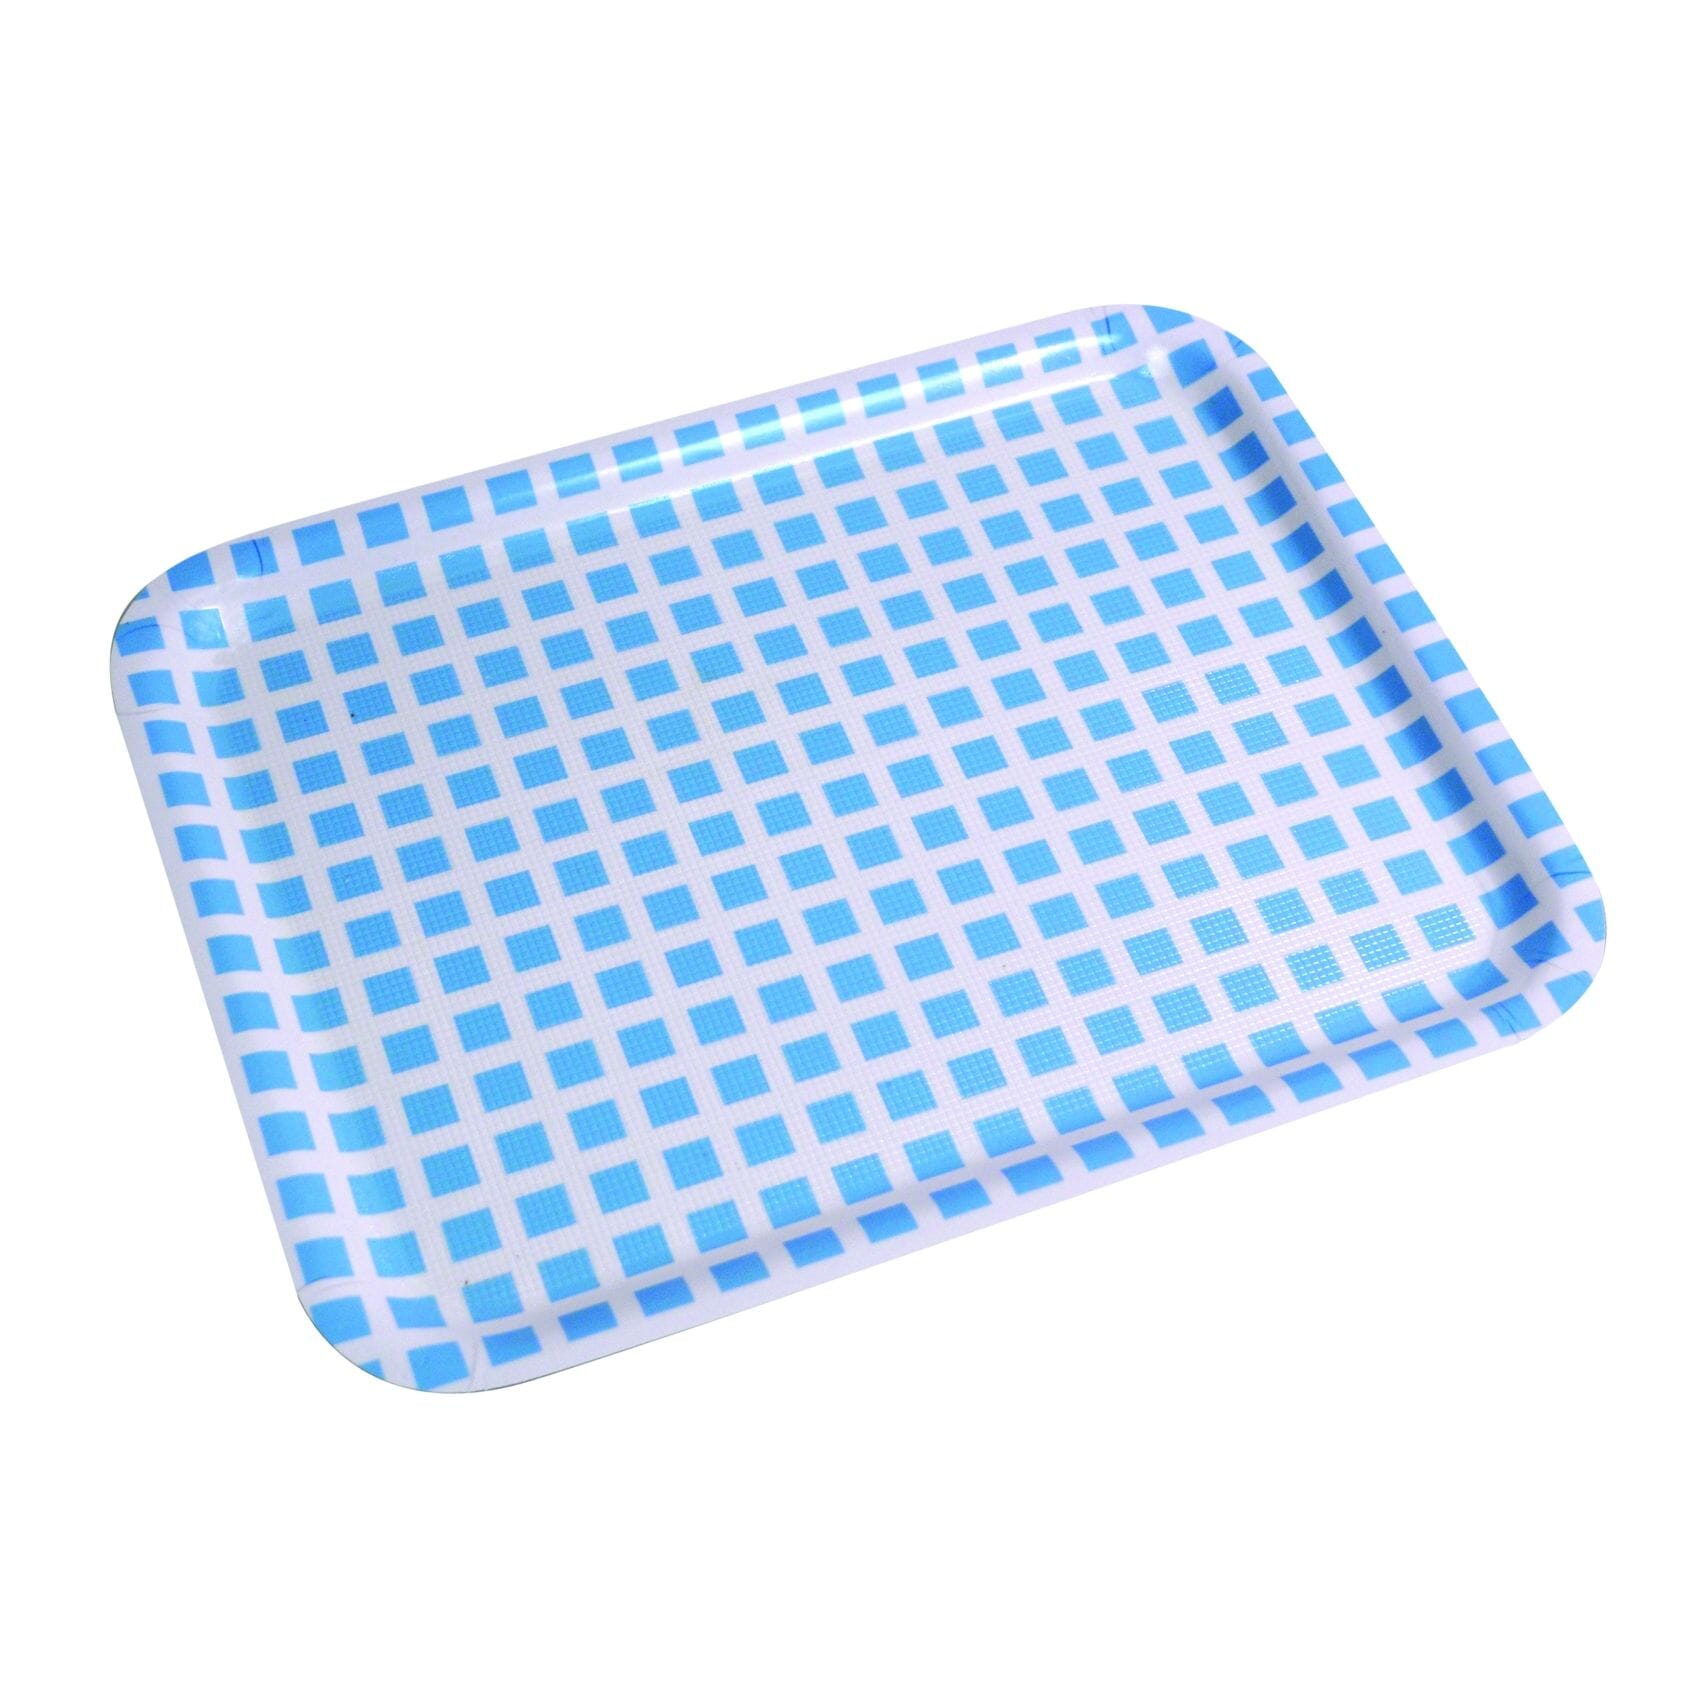 View Non Slip Lap Tray White with pattern information